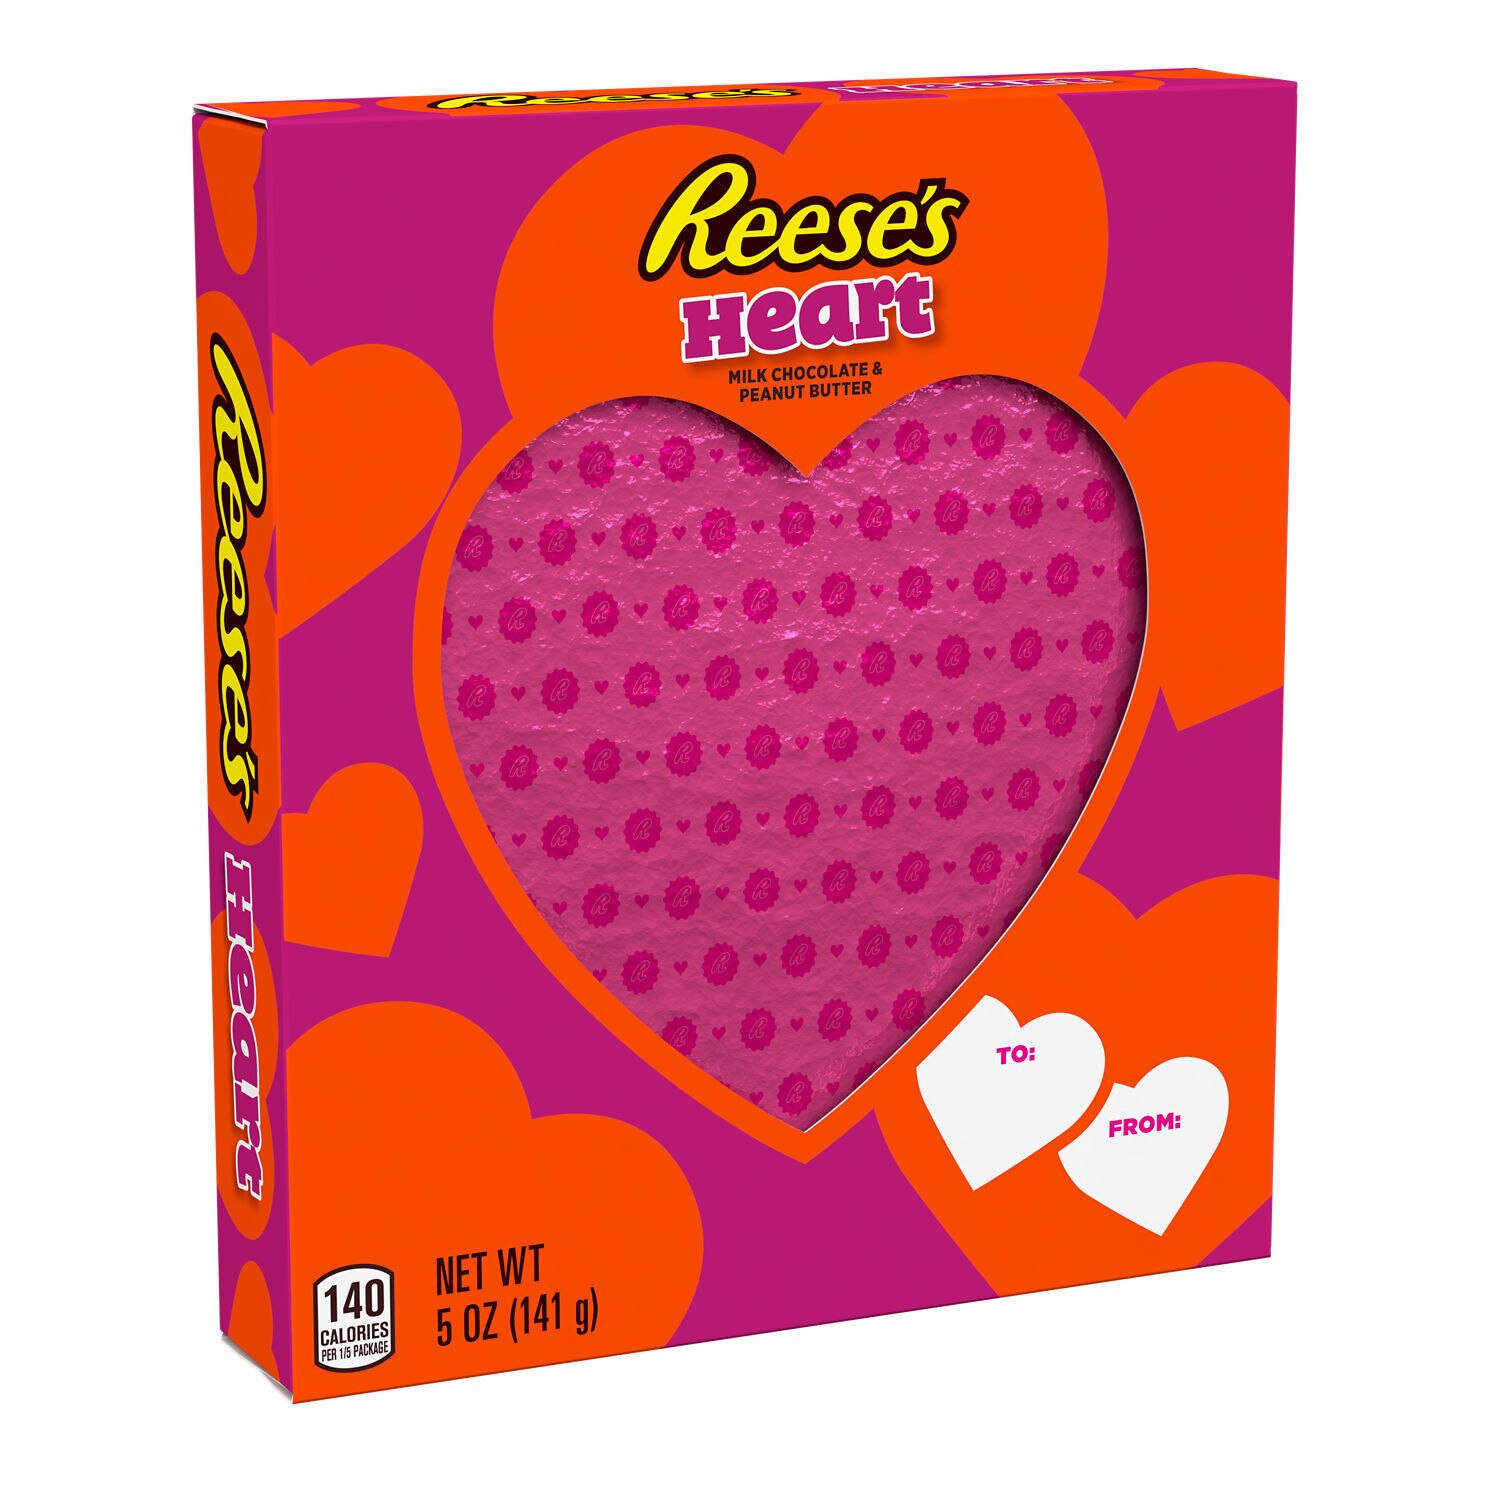 REESE'S Milk Chocolate Peanut Butter Heart Candy, Valentine's Day, 5 oz, Gift Box